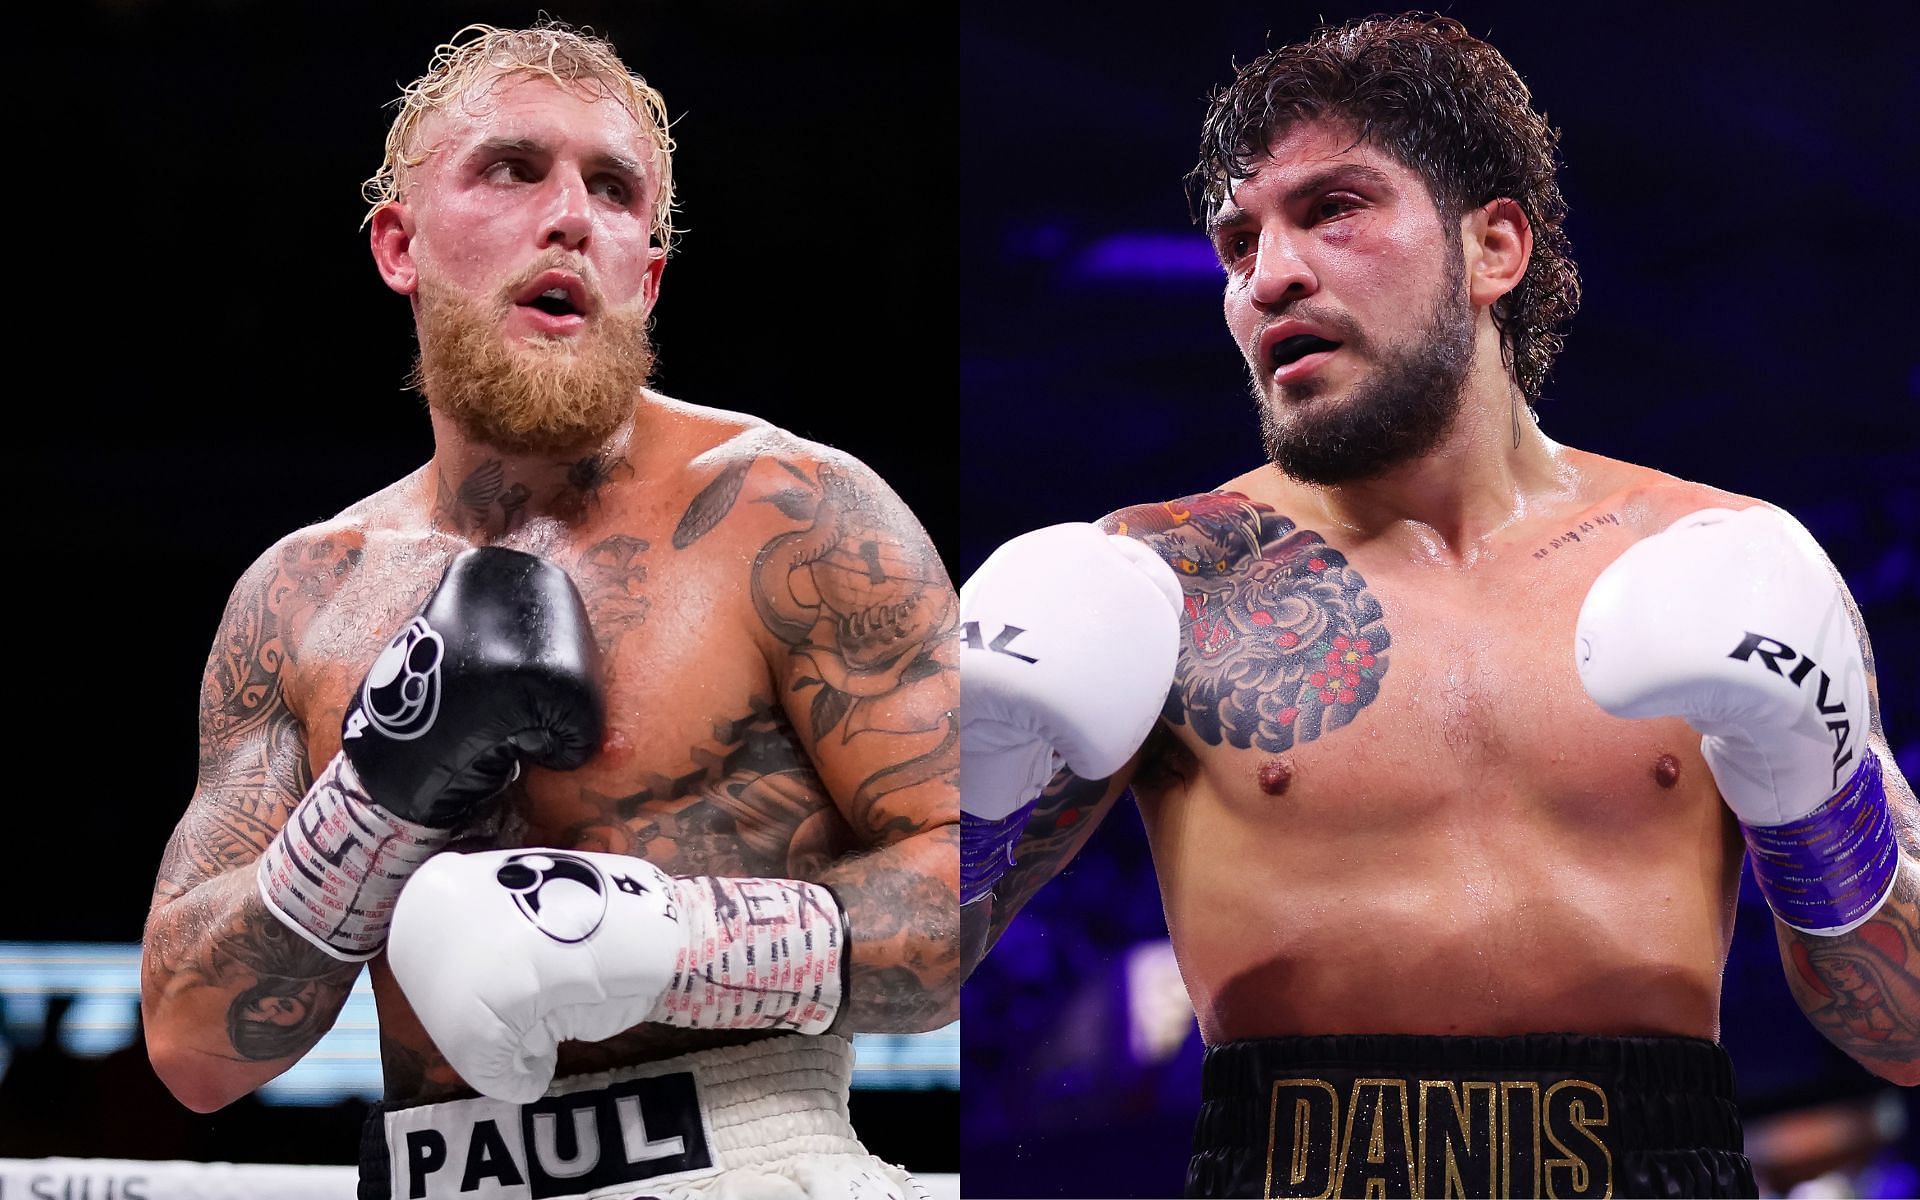 Jake Paul (left) and Dillon Danis (right) have long been feuding against each other [Images courtesy: Getty Images]